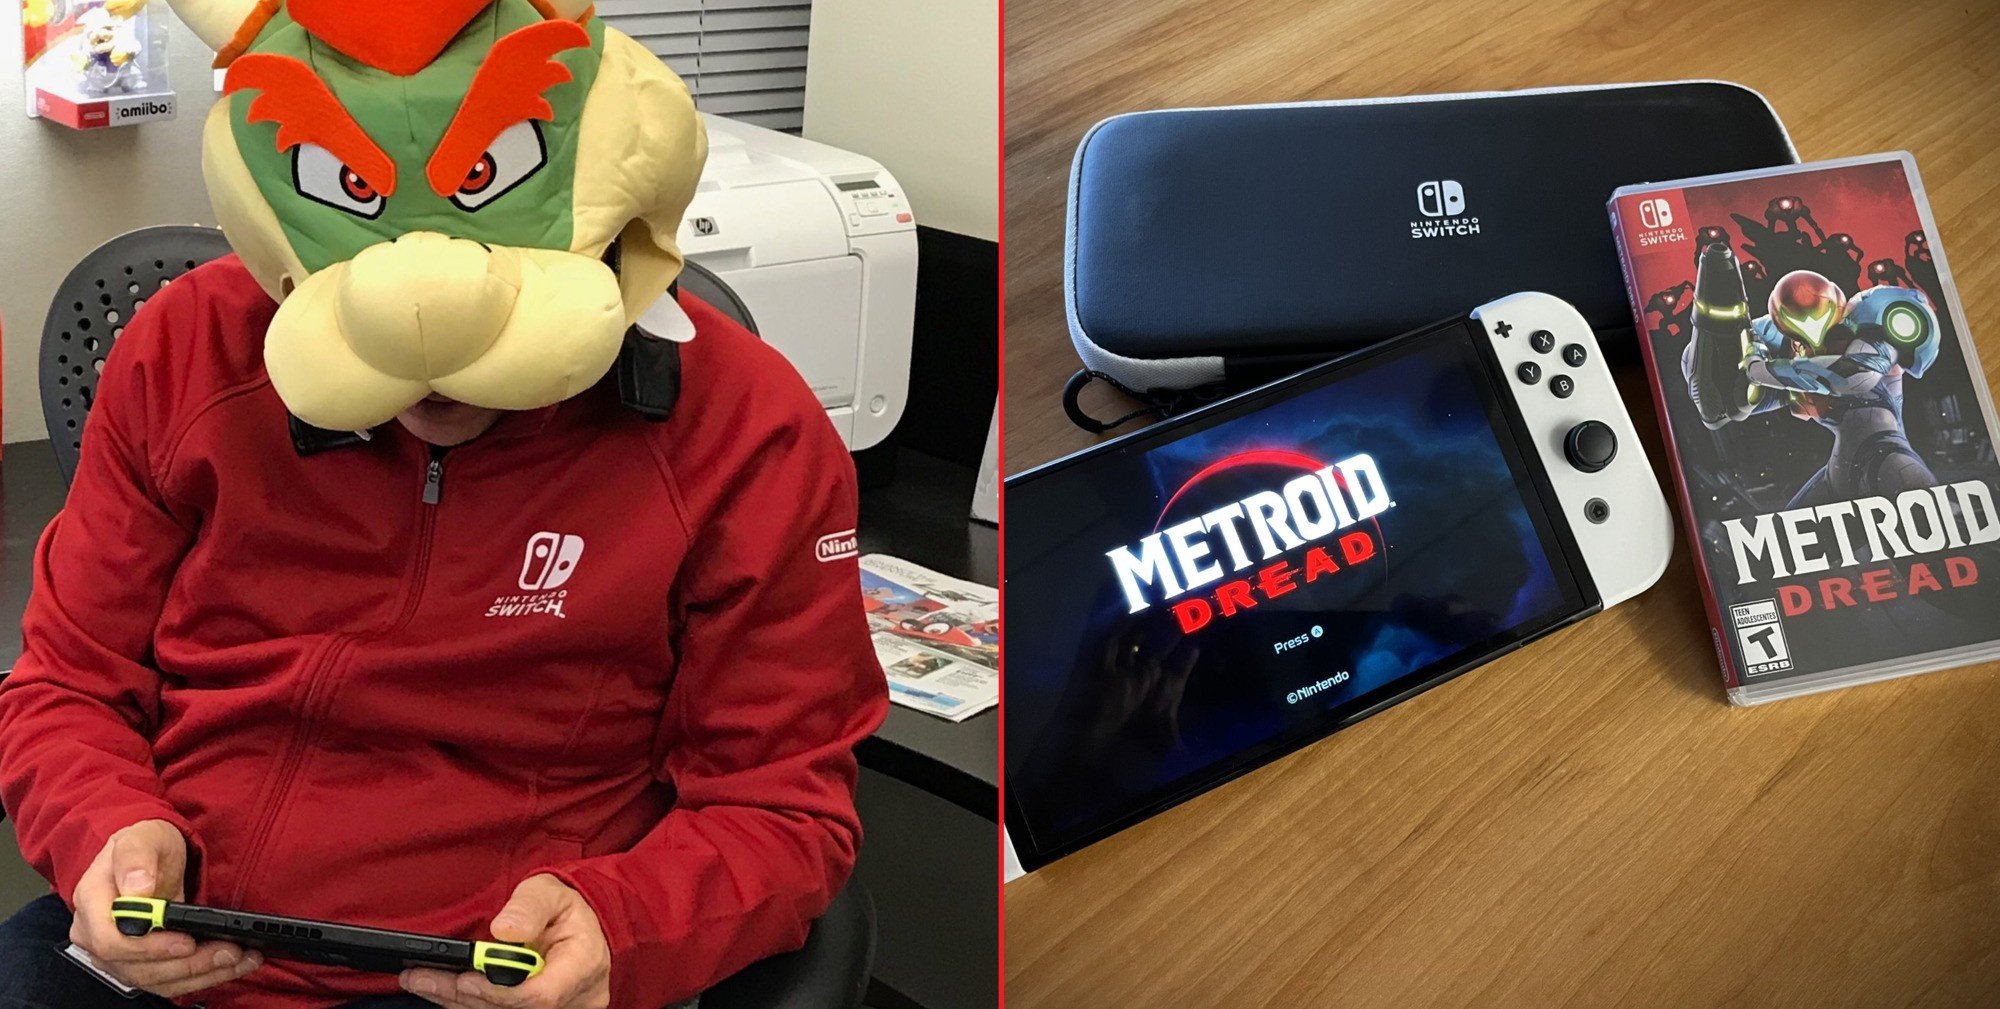 doug-bowsers-copy-of-metroid-dread-and-his-new-switch-oled.original.jpg